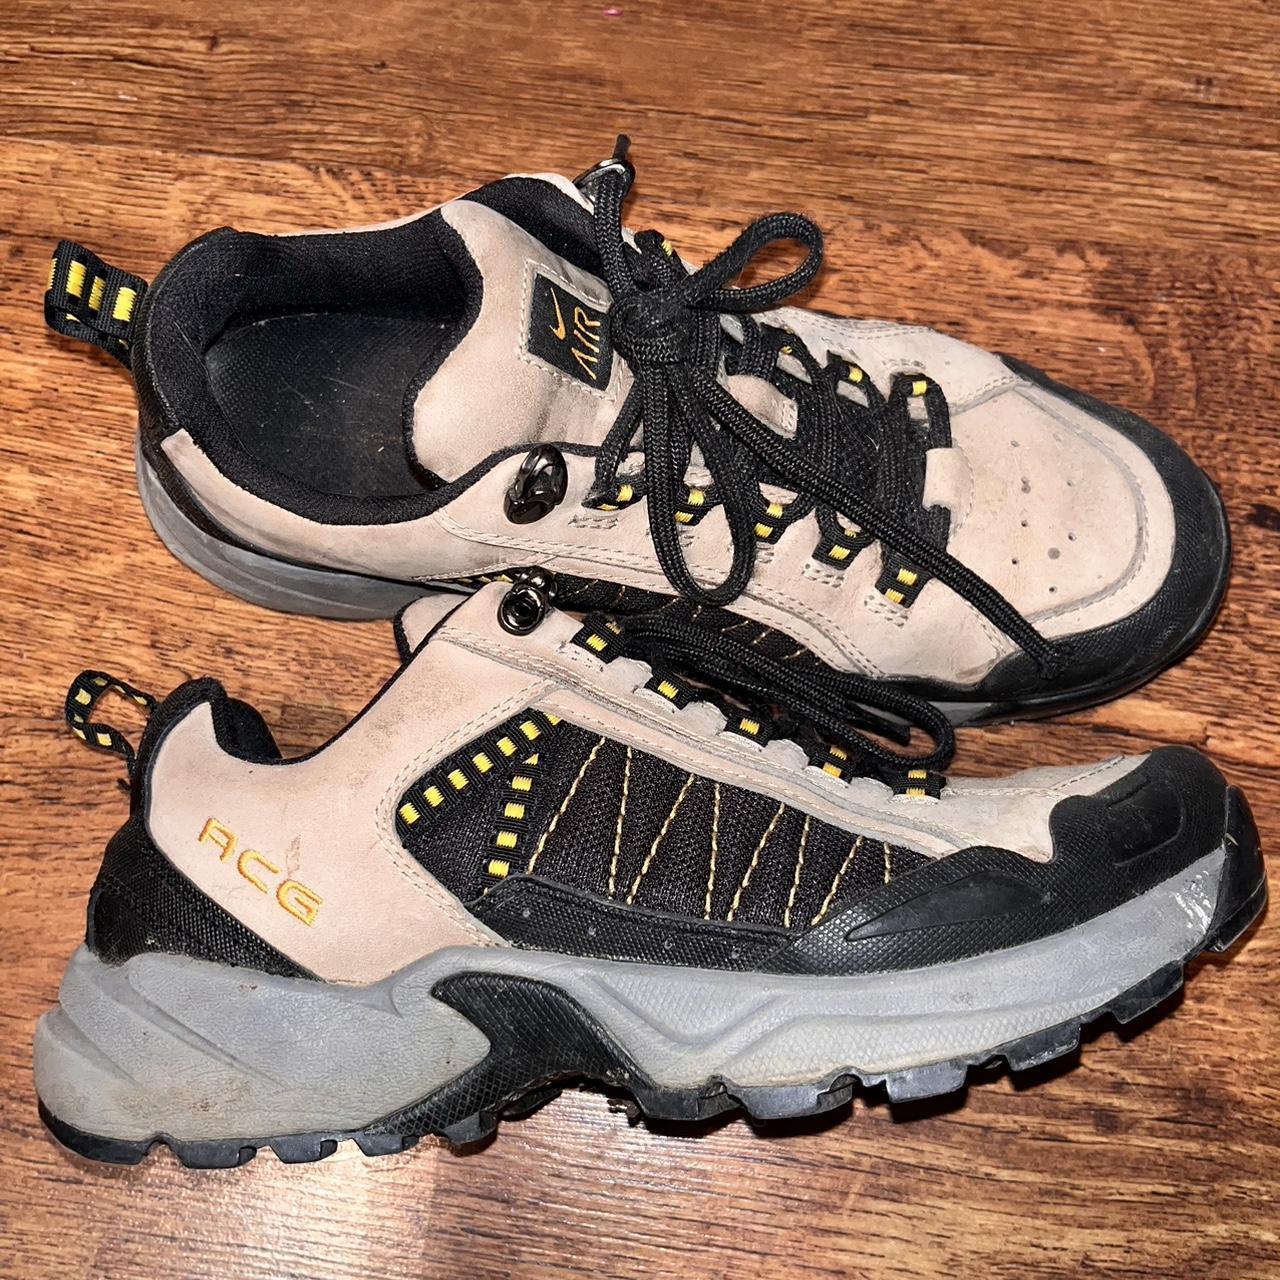 Vintage nike acg hiking shoes size 9 they fit true...